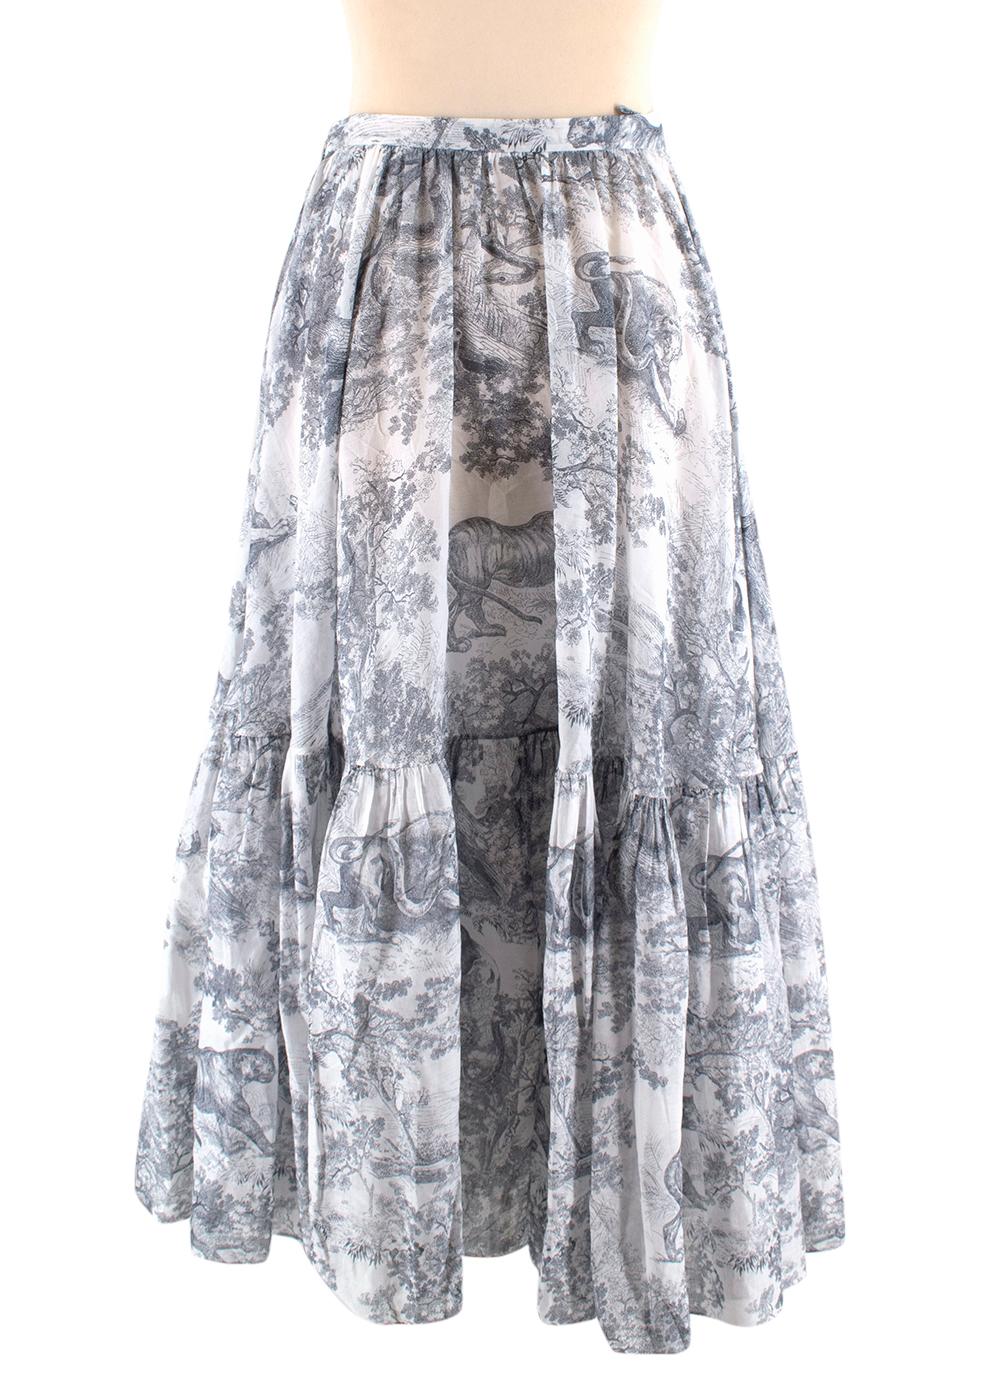 Christian Dior Toile De Jouy Printed Viola Skirt 

- House Emblematic Toile De Jouy Print 
- Hem Pleated 
- Comes With An Under Skirt
- Lightweight
- Side Concealed Zip Closure With Hook Fastening  
- Falls Mid-Length 

Material:
- 100% Cotton